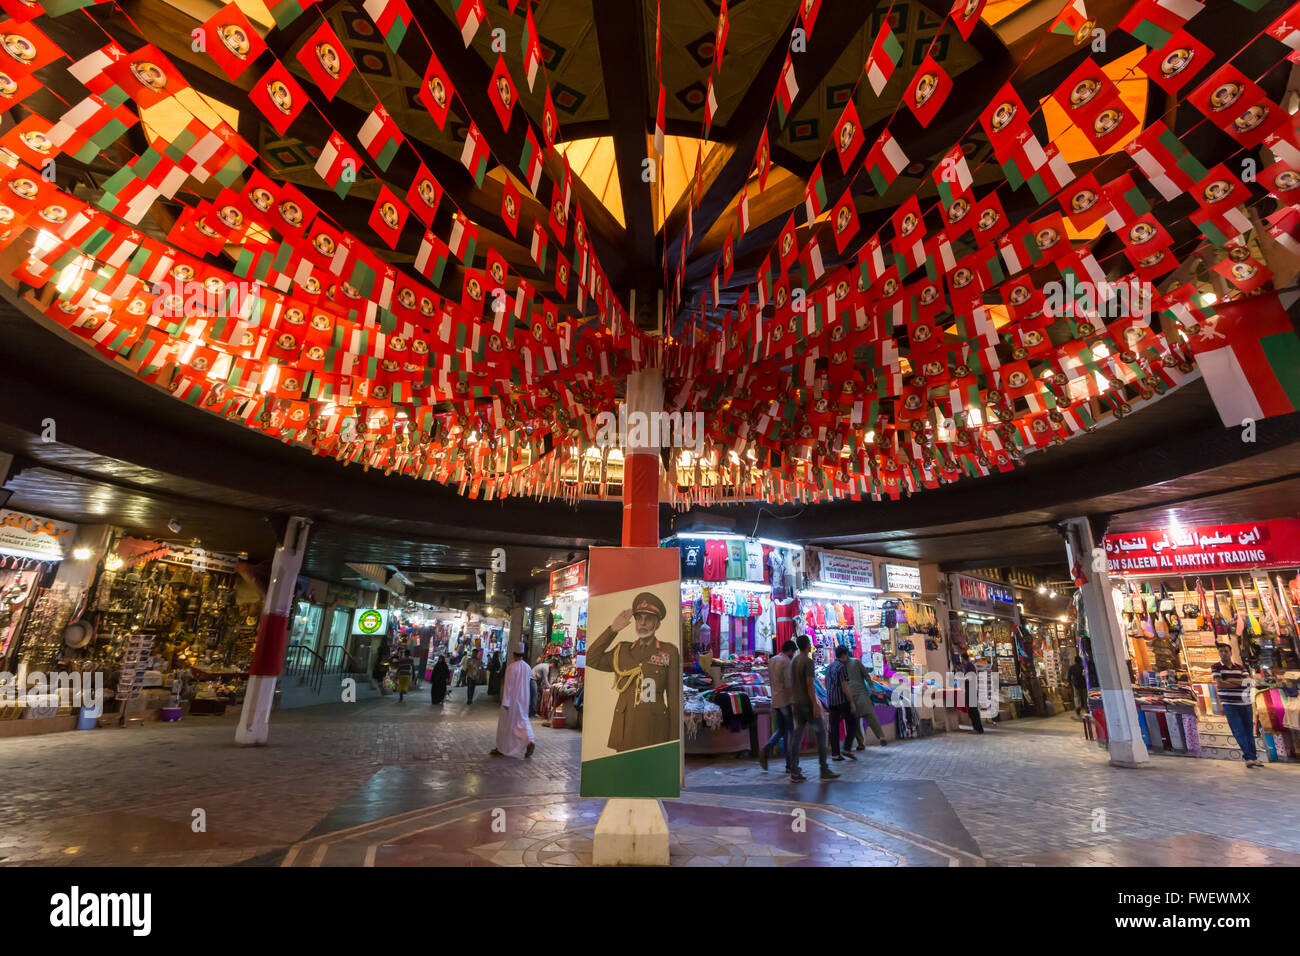 Flags and Sultan's portrait decorate Mutrah Souq for Oman National Day, 18 November, Muscat, Oman, Middle East Stock Photo